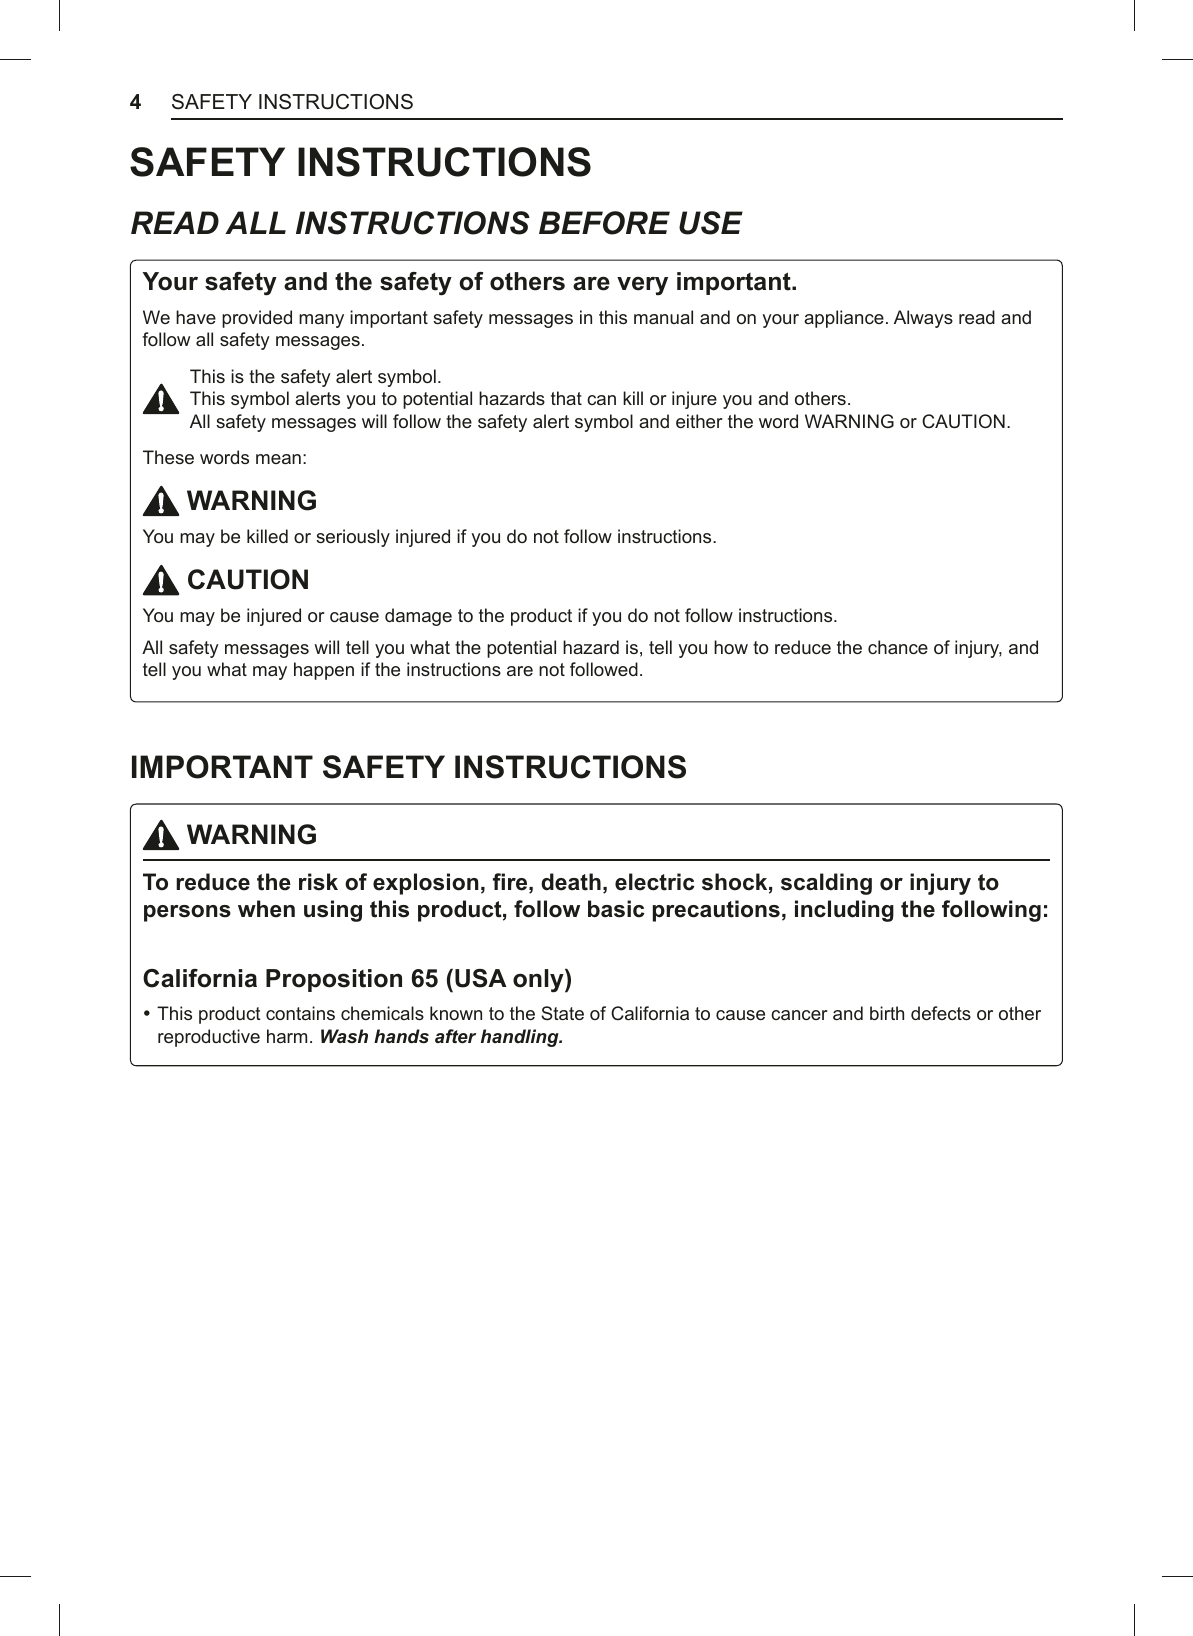 4SAFETY INSTRUCTIONSSAFETY INSTRUCTIONSREAD ALL INSTRUCTIONS BEFORE USEYour safety and the safety of others are very important.We have provided many important safety messages in this manual and on your appliance. Always read and follow all safety messages.This is the safety alert symbol.  This symbol alerts you to potential hazards that can kill or injure you and others.  All safety messages will follow the safety alert symbol and either the word WARNING or CAUTION.These words mean: WARNINGYou may be killed or seriously injured if you do not follow instructions. CAUTIONYou may be injured or cause damage to the product if you do not follow instructions.All safety messages will tell you what the potential hazard is, tell you how to reduce the chance of injury, and tell you what may happen if the instructions are not followed.IMPORTANT SAFETY INSTRUCTIONS WARNING7RUHGXFHWKHULVNRIH[SORVLRQ¿UHGHDWKHOHFWULFVKRFNVFDOGLQJRULQMXU\WRSHUVRQVZKHQXVLQJWKLVSURGXFWIROORZEDVLFSUHFDXWLRQVLQFOXGLQJWKHIROORZLQJCalifornia Proposition 65 (USA only) %This product contains chemicals known to the State of California to cause cancer and birth defects or other reproductive harm. Wash hands after handling.